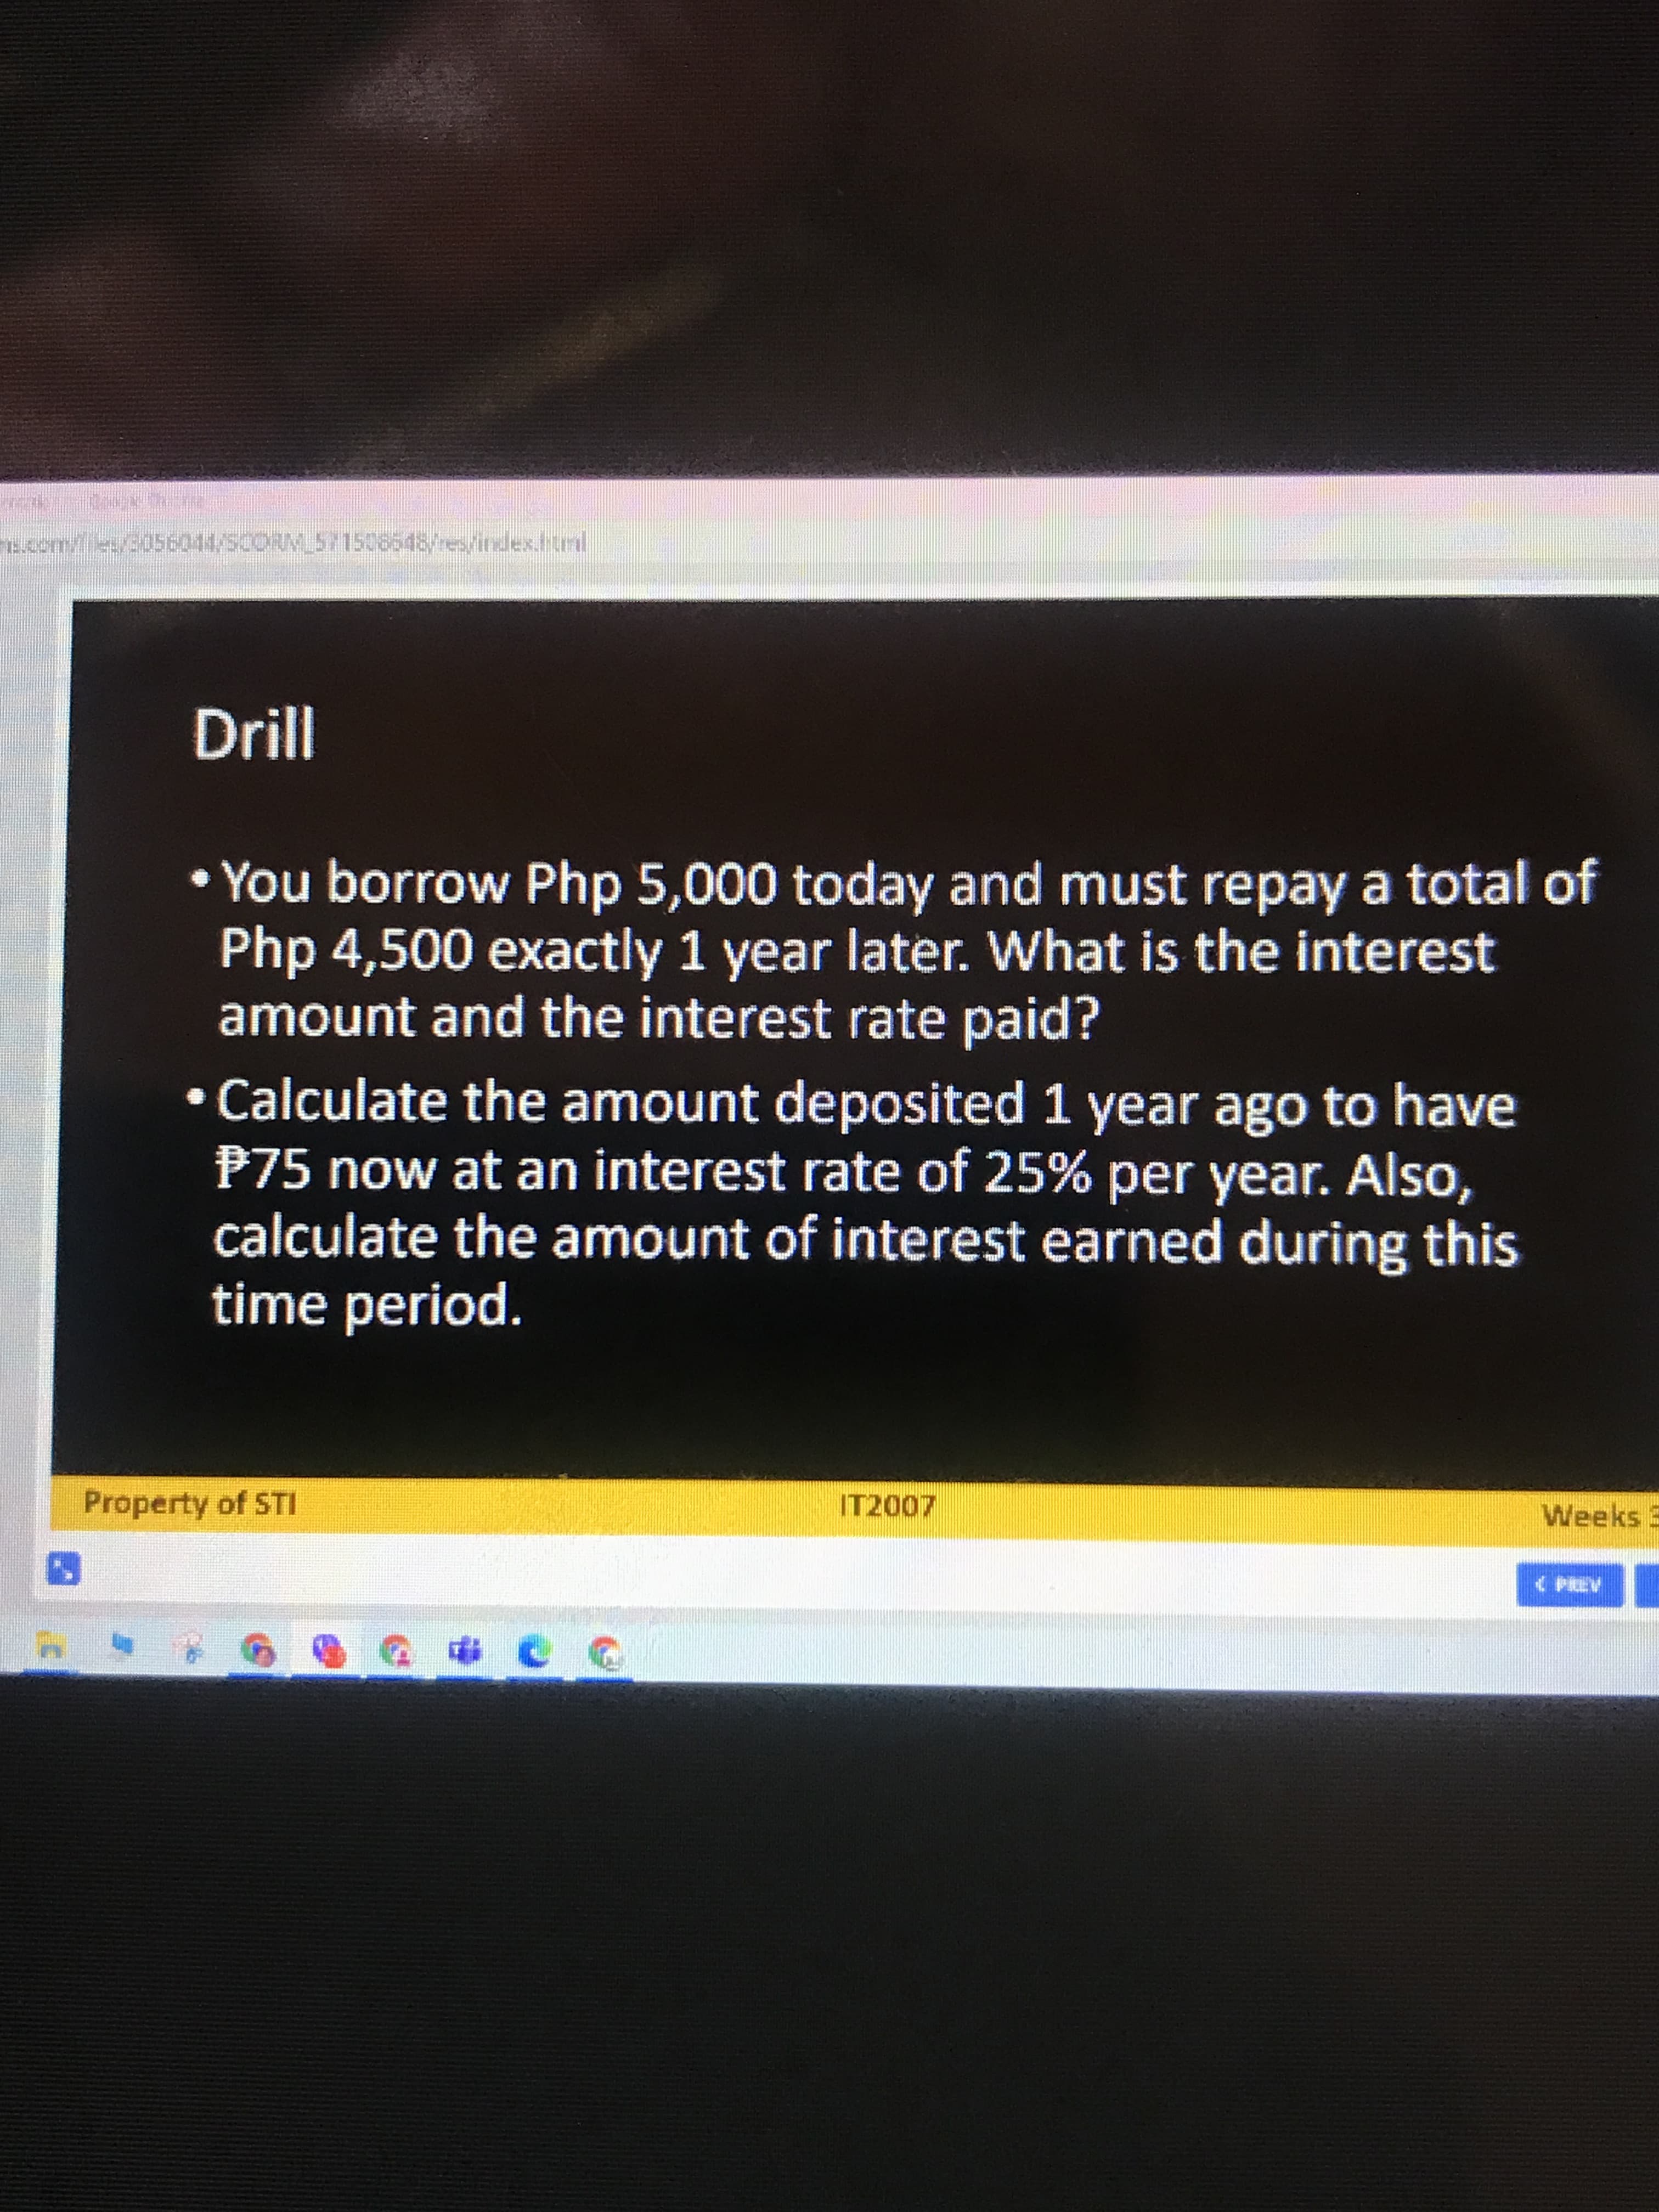 s.com/les/3056044/5CORM_51508648/res/index.ttral
• You borrow Php 5,000 today and must repay a total of
Php 4,500 exactly 1 year later. What is the interest
amount and the interest rate paid?
Calculate the amount deposited 1 year ago to have
P75 now at an interest rate of 25% per year. Also,
calculate the amount of interest earned during this
time period.
Property of STI
IT2007
Weeks 3
( PREV
20カひ 9 m
